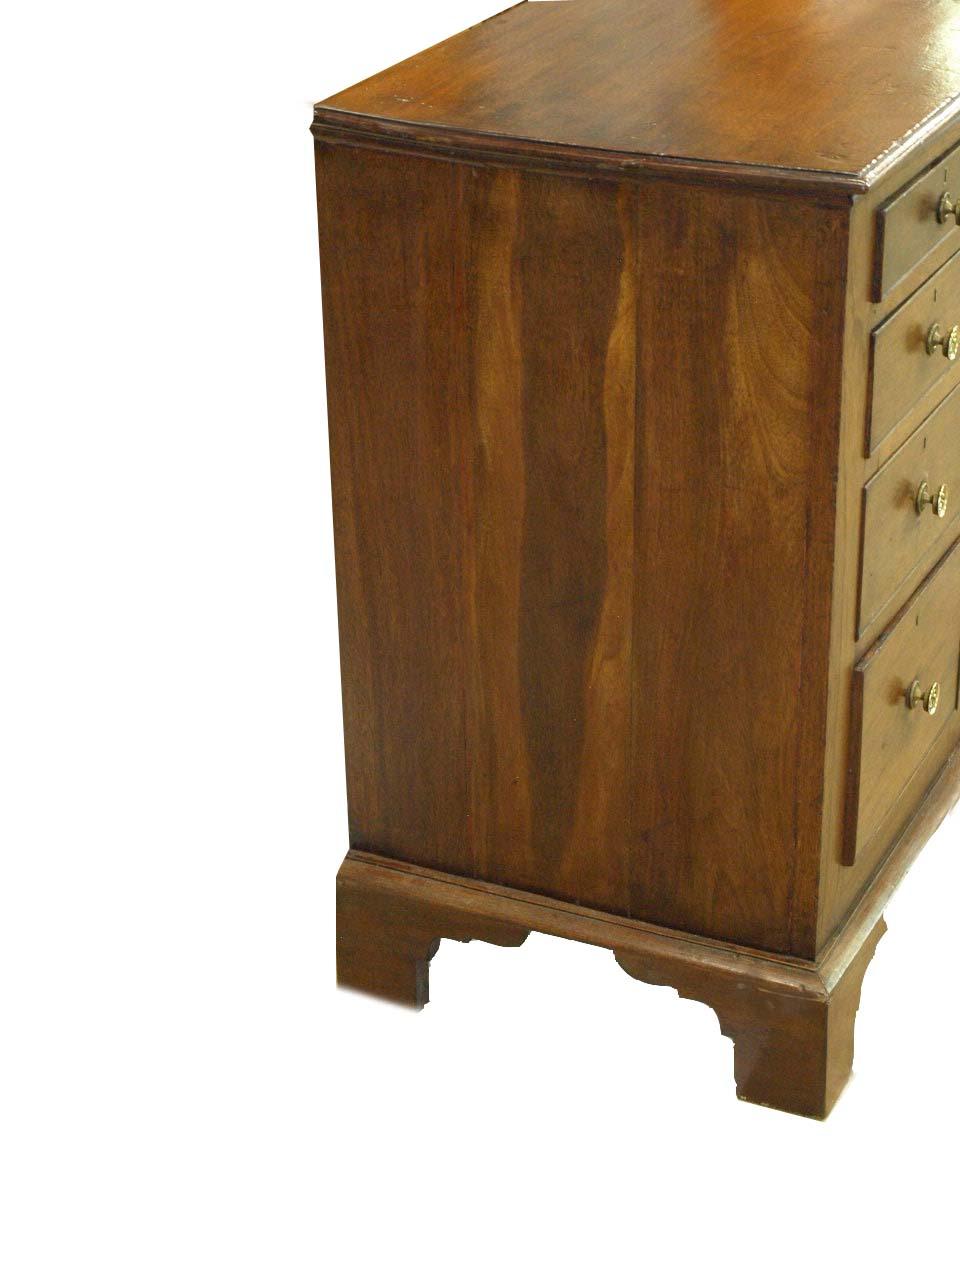 Georgian mahogany sideboard with nine drawers surrounding center recessed door, interior with one shelf. Brass knobs are typical for this piece but are not original. Of note, the top has been professionally refinished and has a slightly darker umber